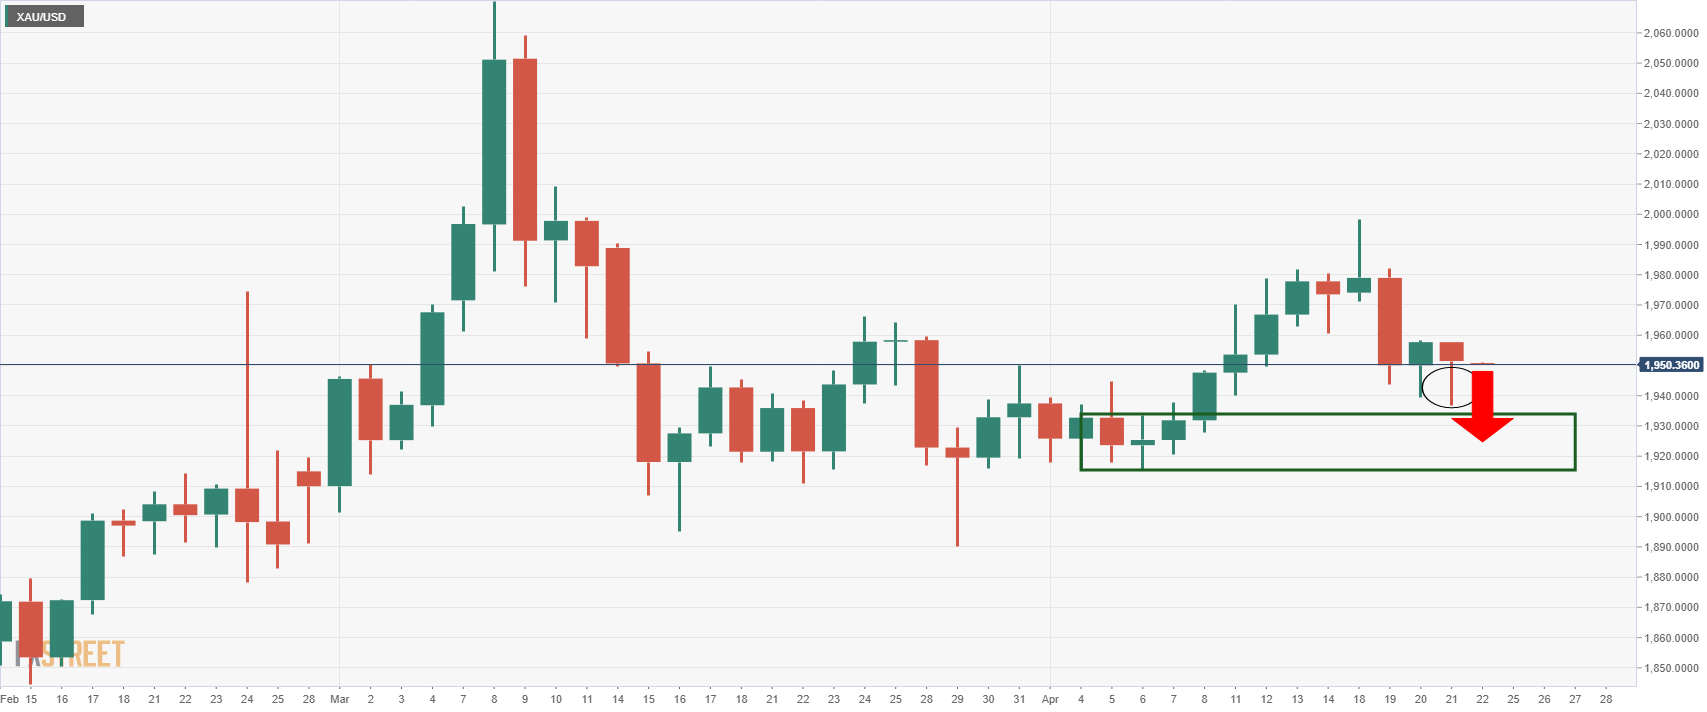 Gold Price Forecast: XAUUSD recovers from intra-day dip under $1930, but still pressured as yields/USD rise - 3